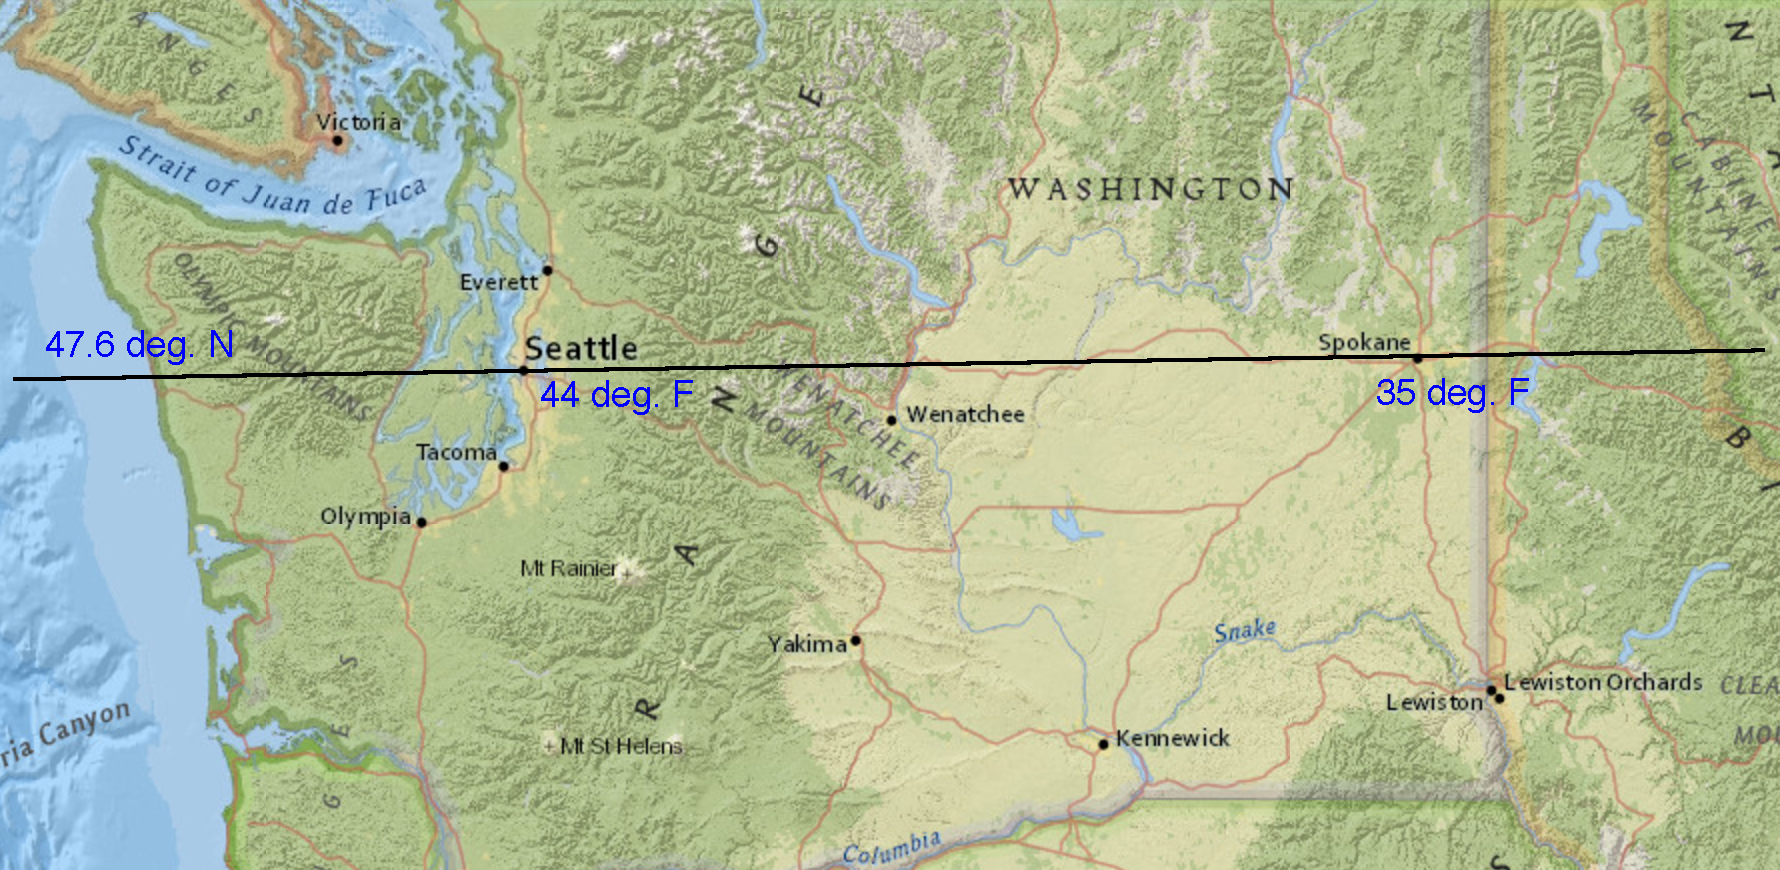 A map of Washington state. A horizontal line, labeled "forty seven point 6 degrees north" passes through two points - the cities of Seattle and Spokane. Next to Seattle, the listed temperature is "44 degrees Fahrenheit." Next to Spokane, the listed temperature is "35 degrees Fahrenheit."